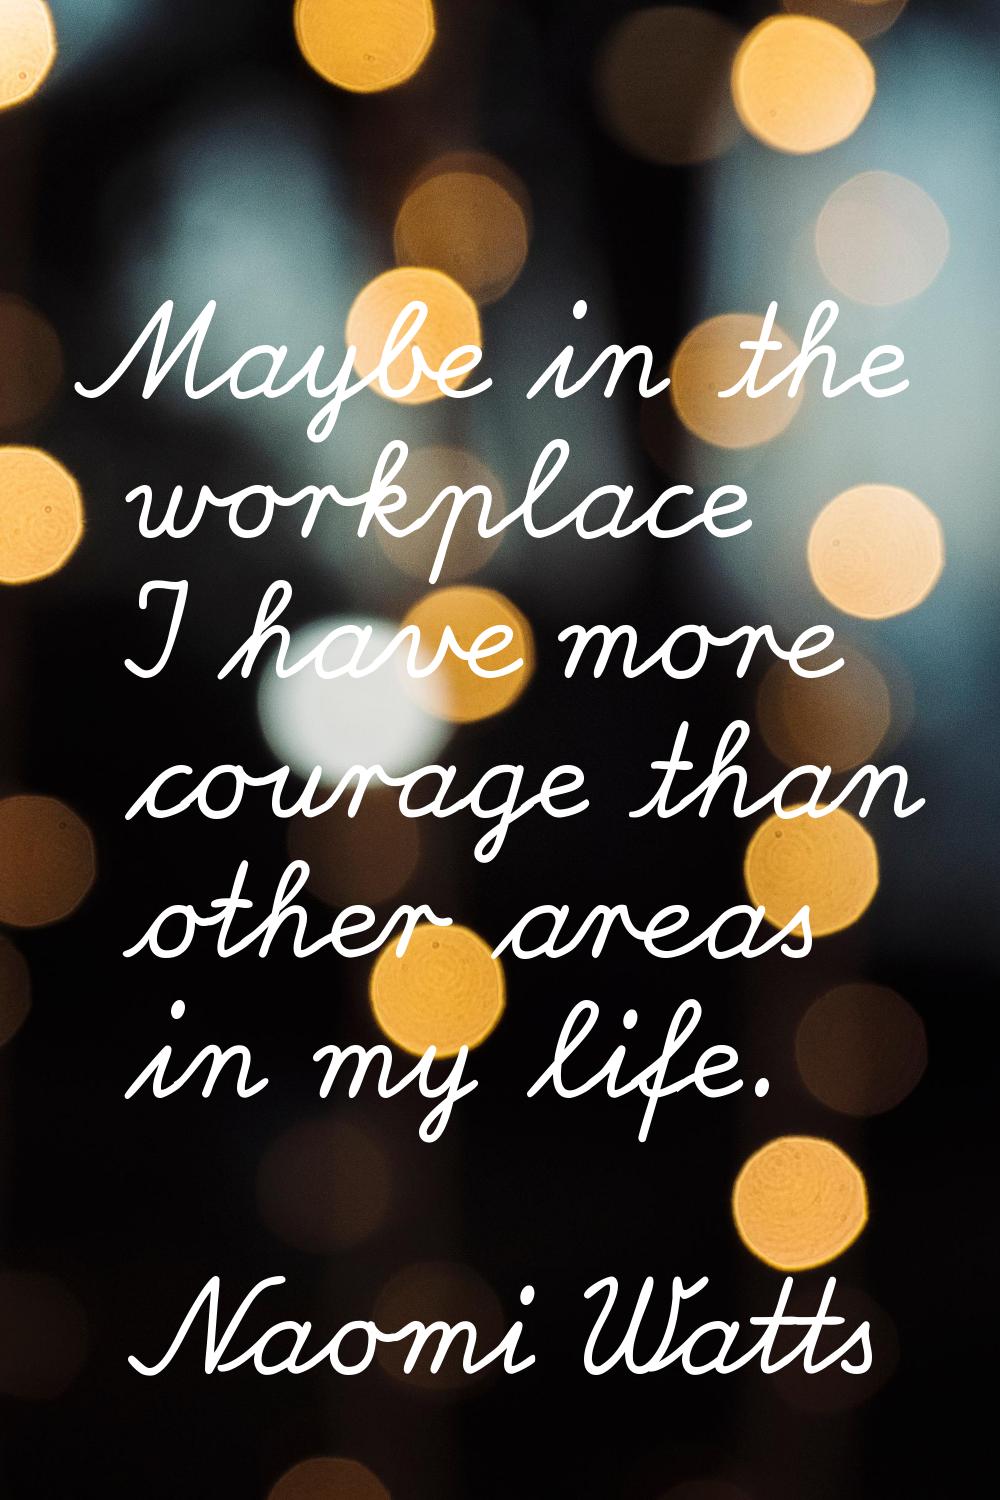 Maybe in the workplace I have more courage than other areas in my life.